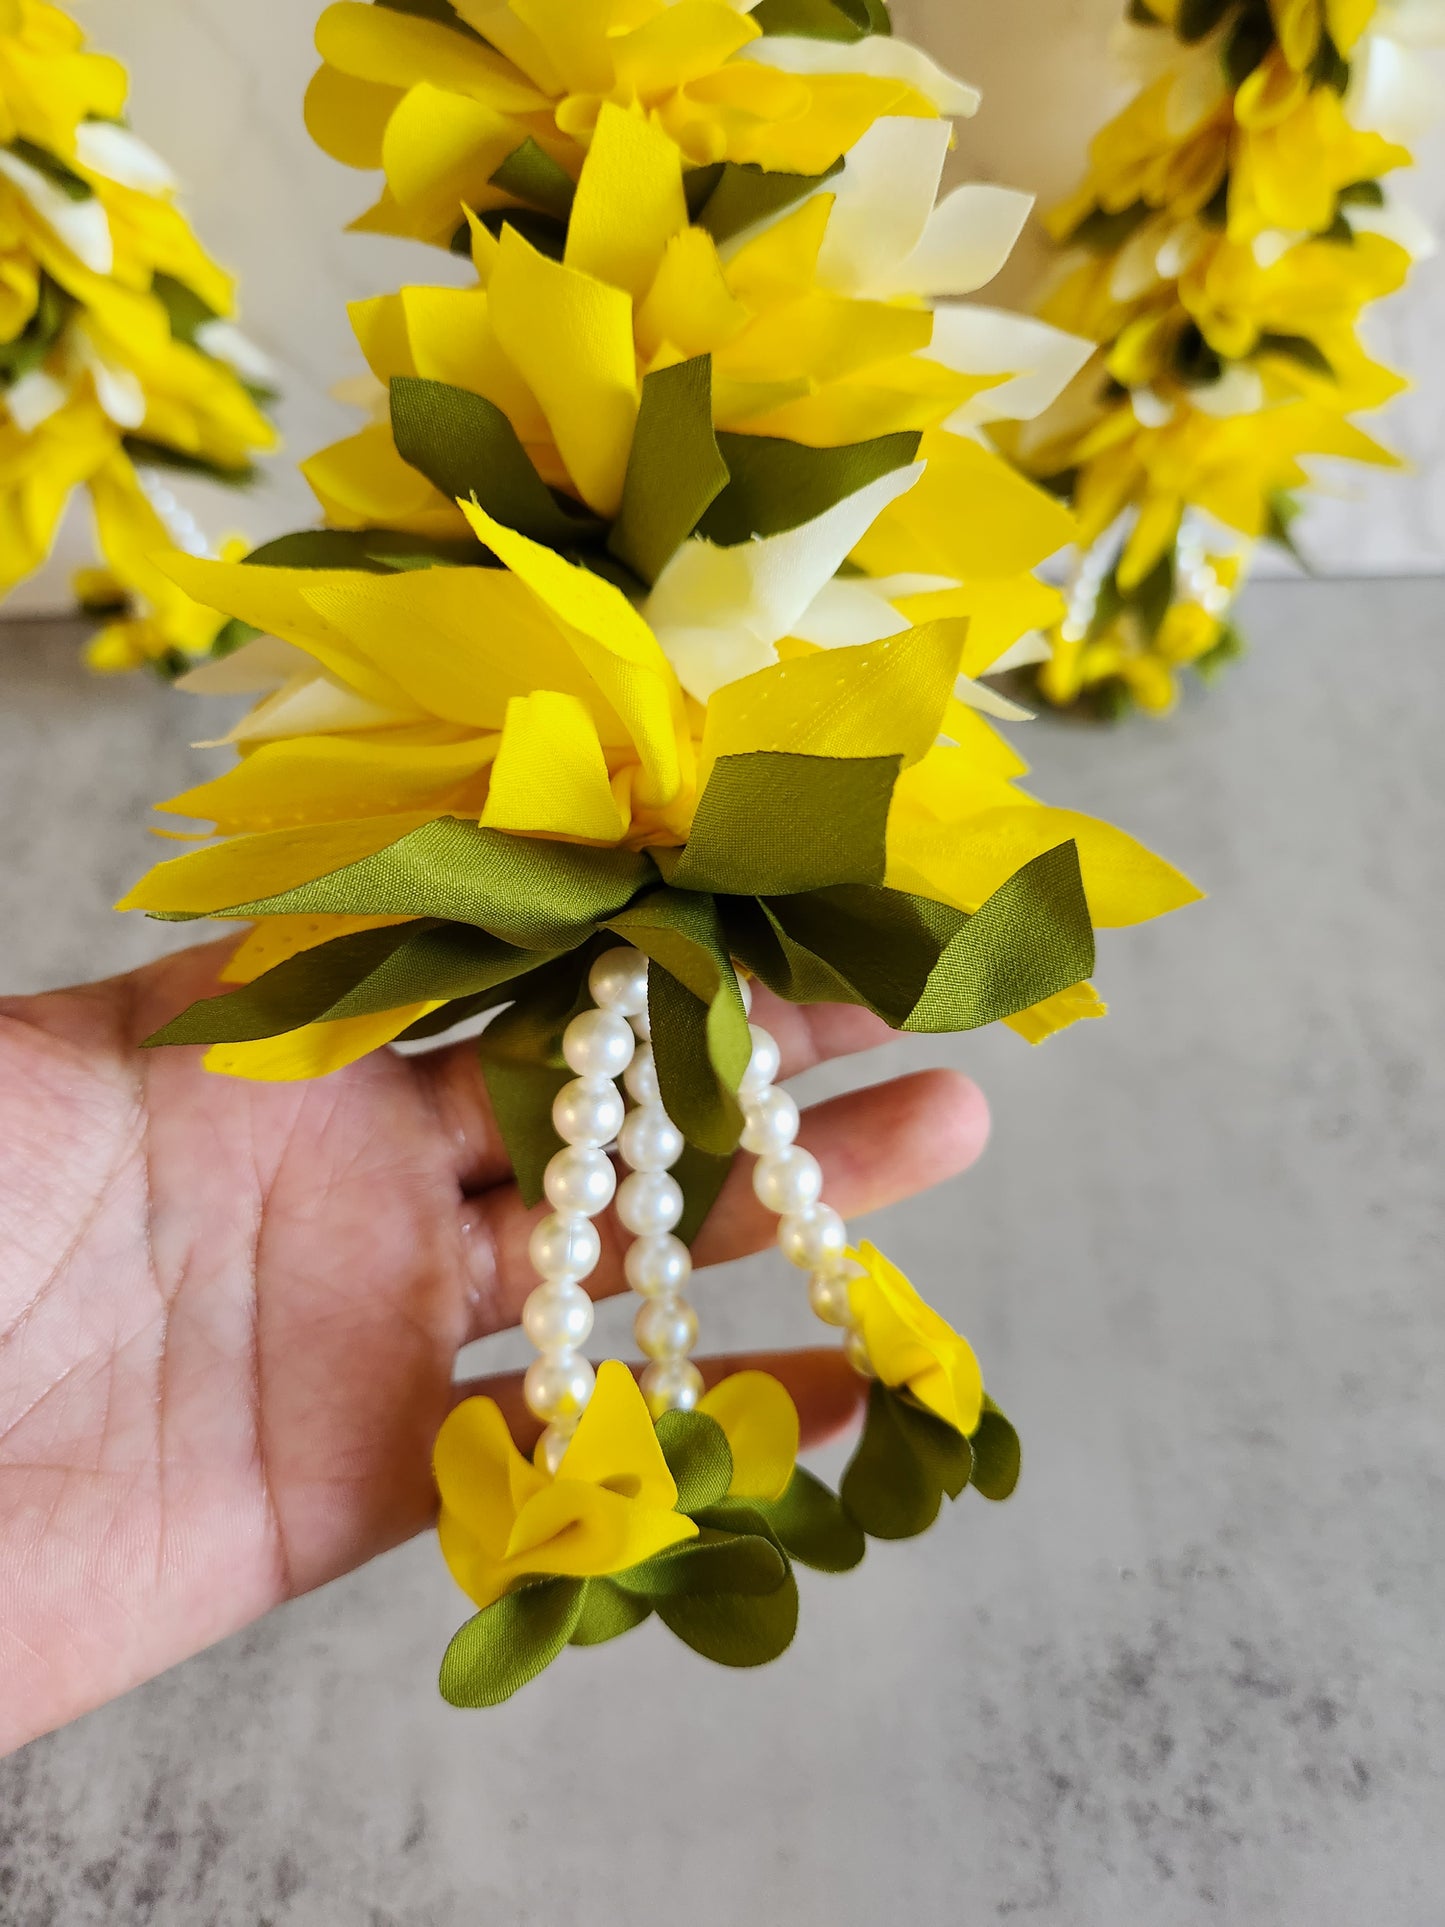 White & Yellow Artificial Floral String